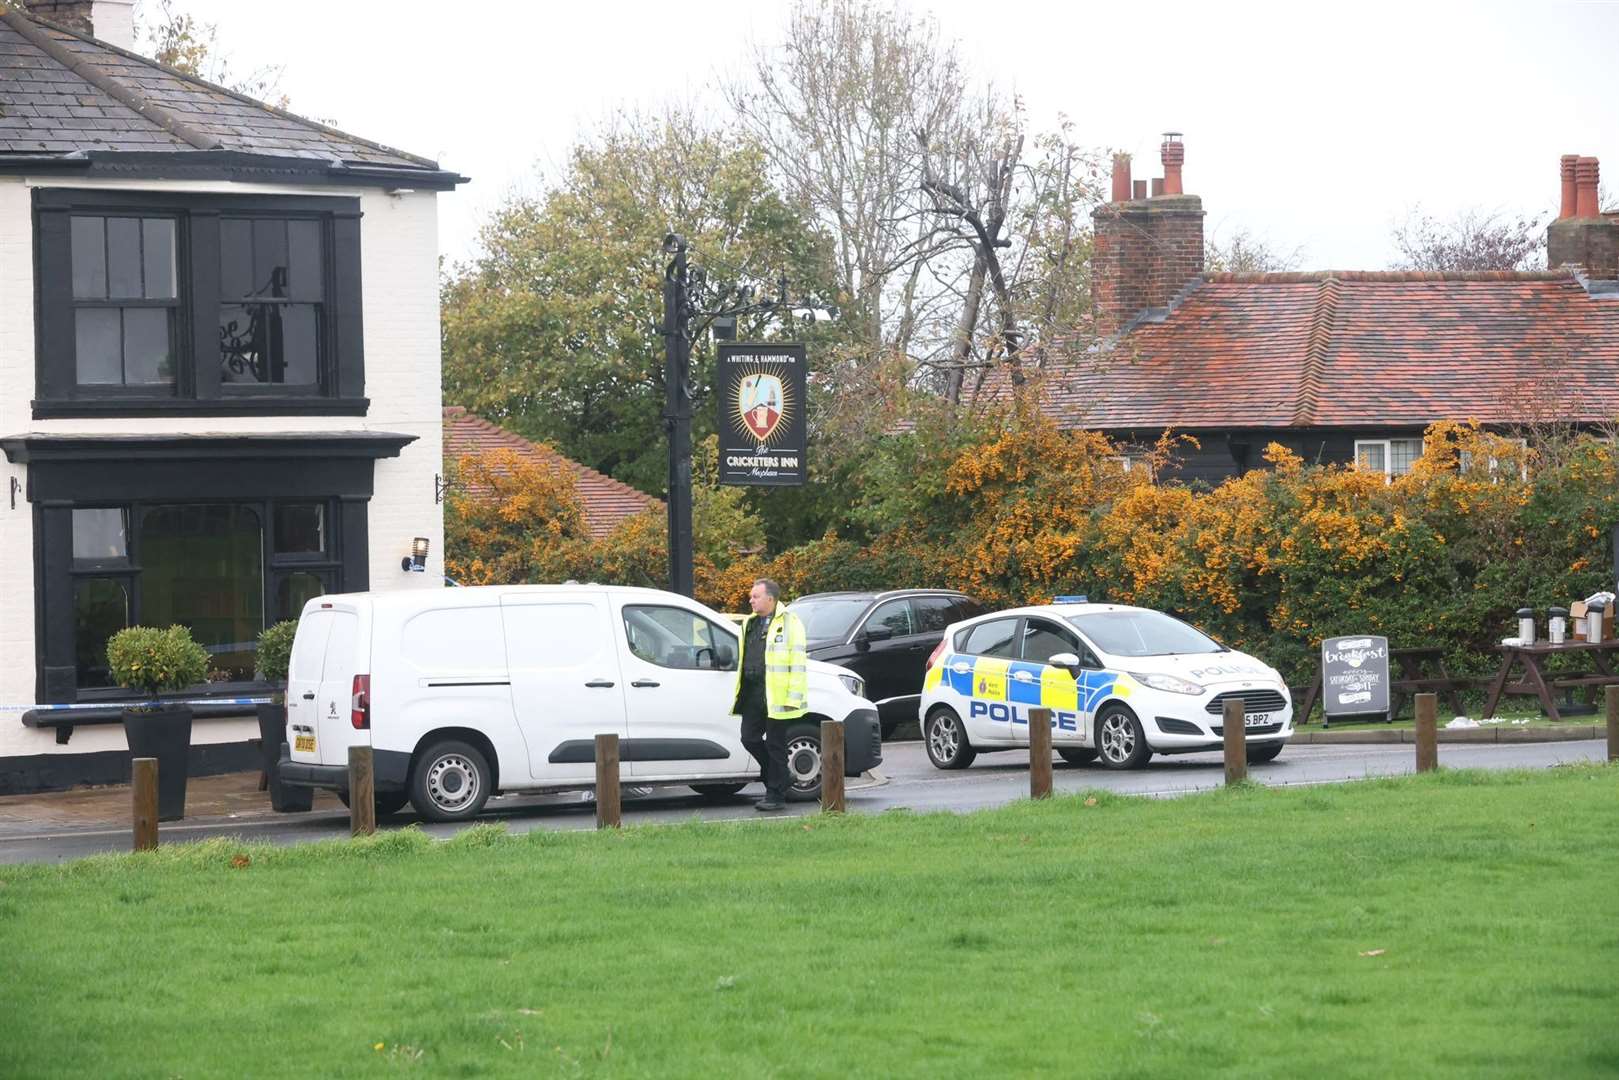 The Cricketers pub in Meopham where a fatal stabbing took place last night. Pic: UKNIP